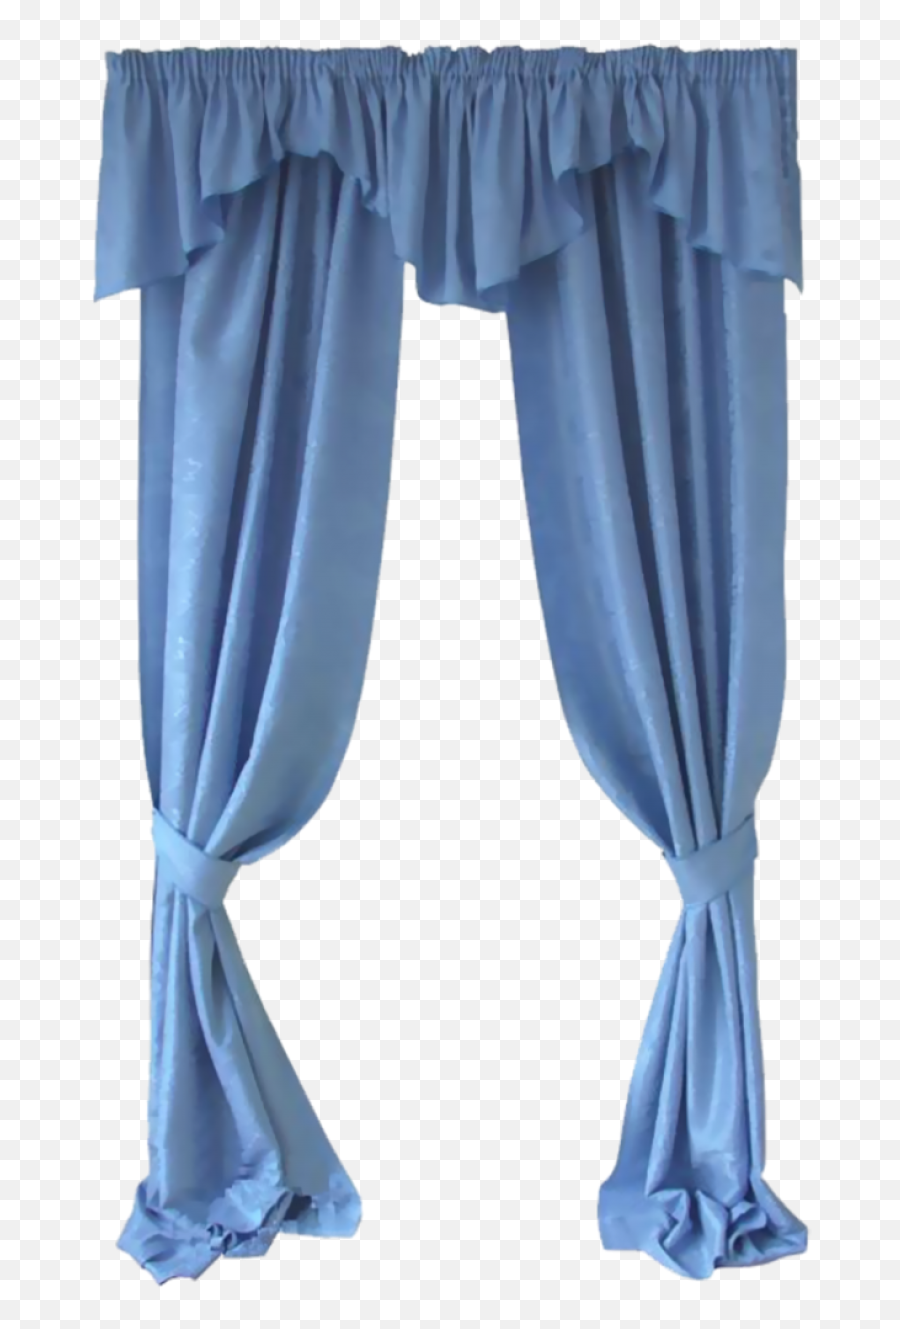 Curtains Png Image - Curtains Png Clip Art,Curtain Png